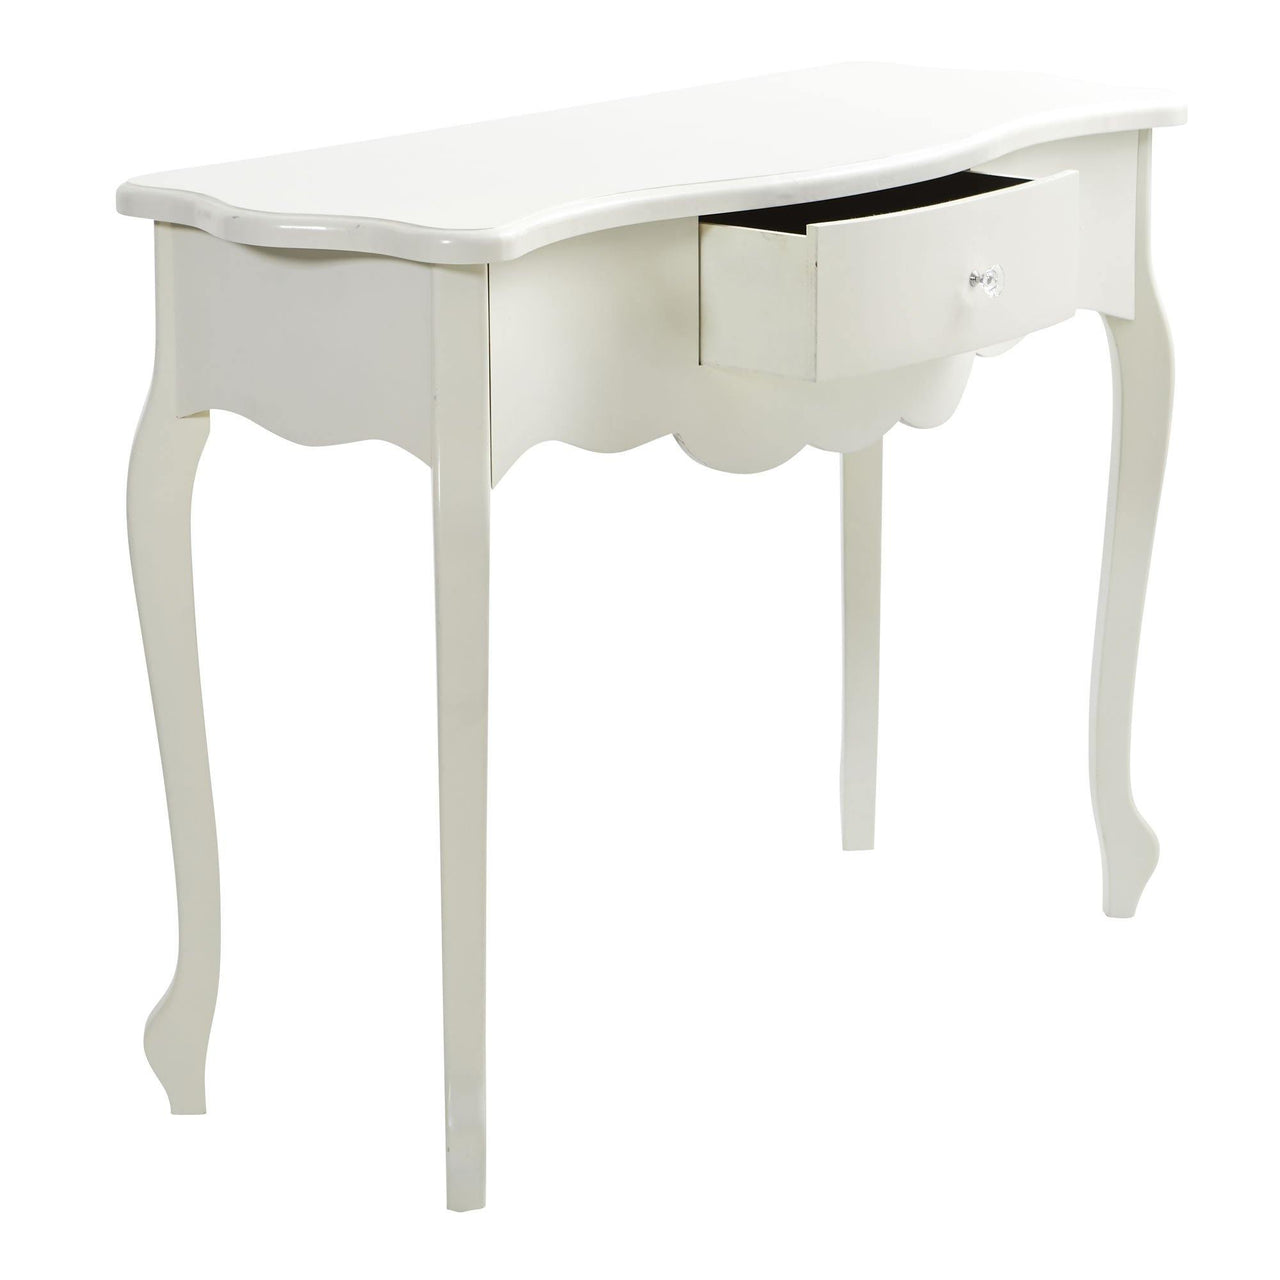 45.5’’ Vintage White Desk With Drawer - The Fox Decor